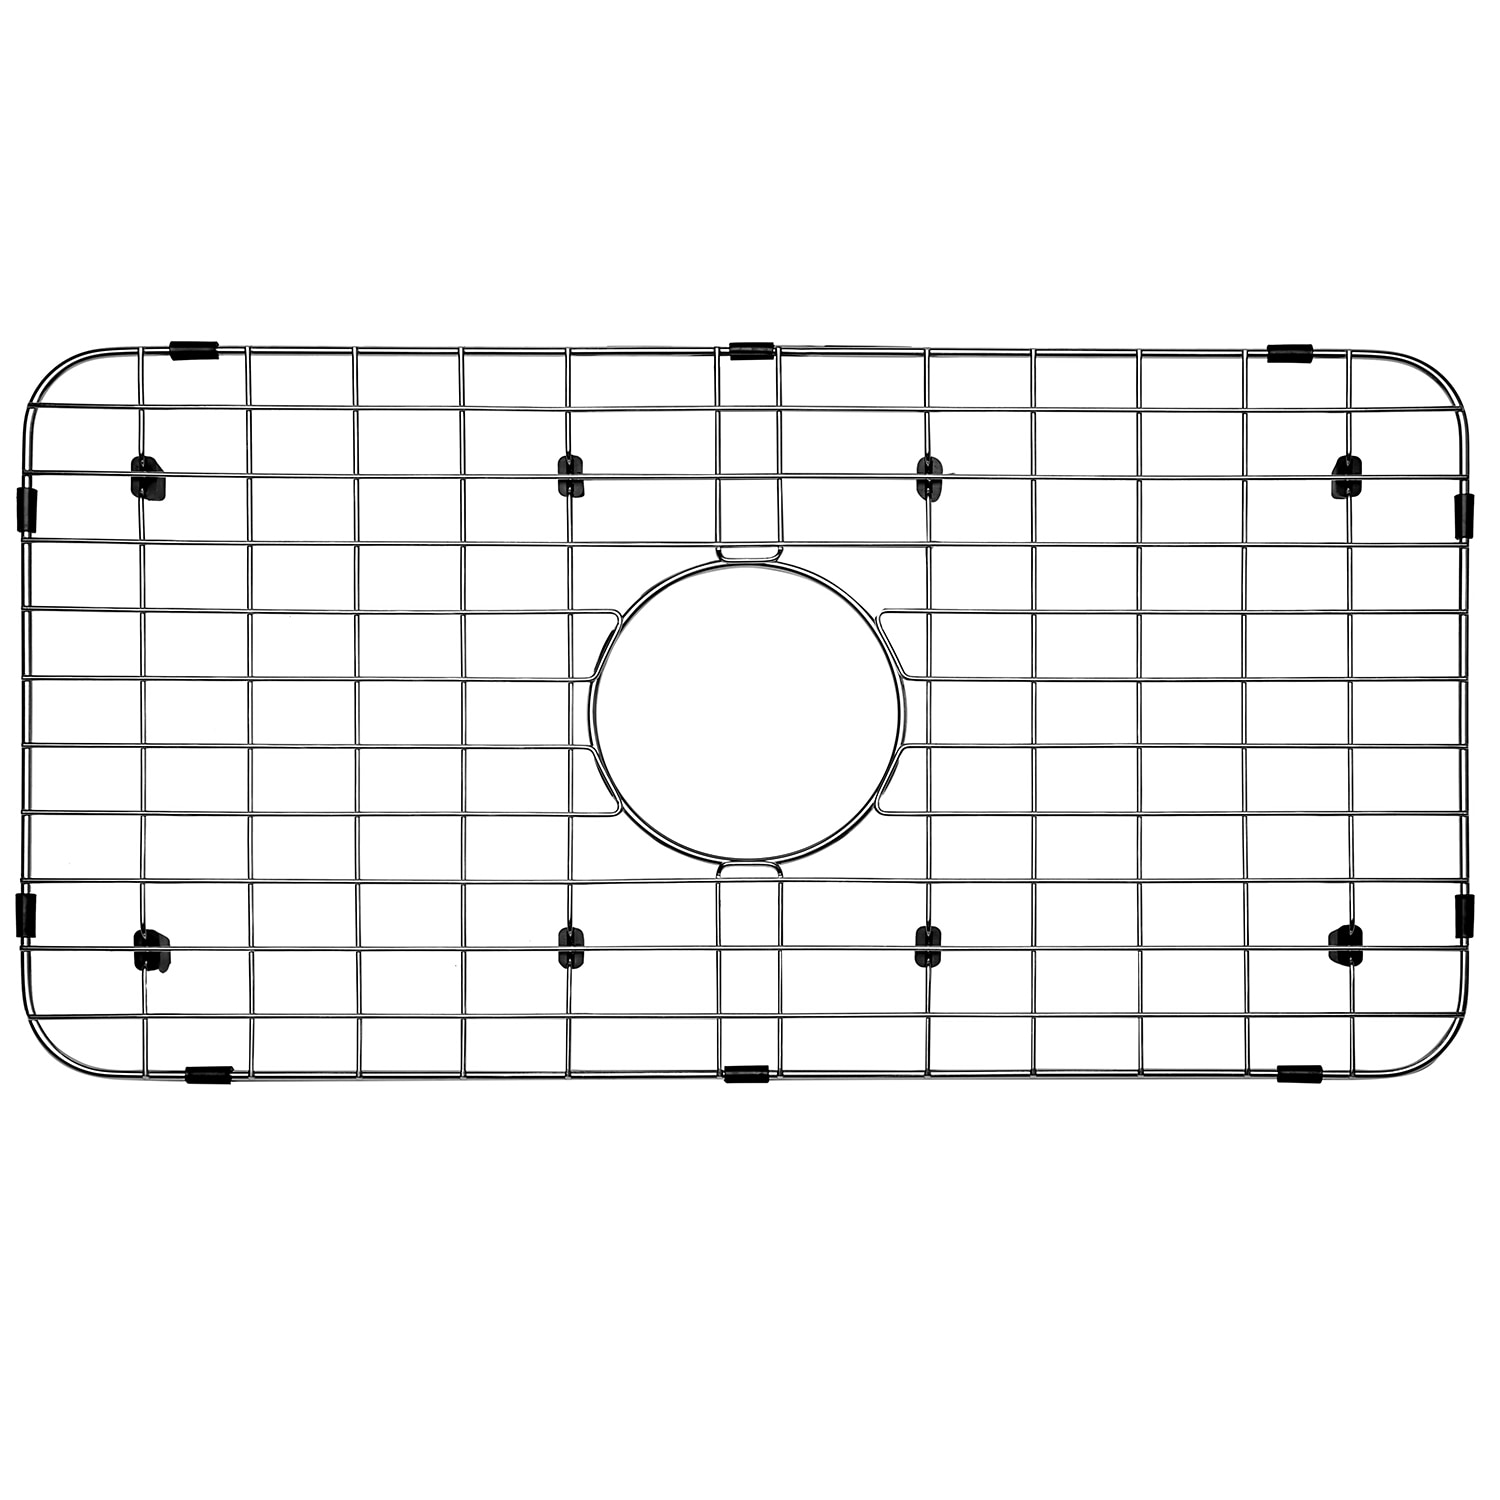 304 Heavy Gauge Stainless Steel 2 grids set with Combined Dimension 29-1/4 X 14-13/16 Serene Valley Sink Grid NWH-K6488 Upper Right Corner Drain